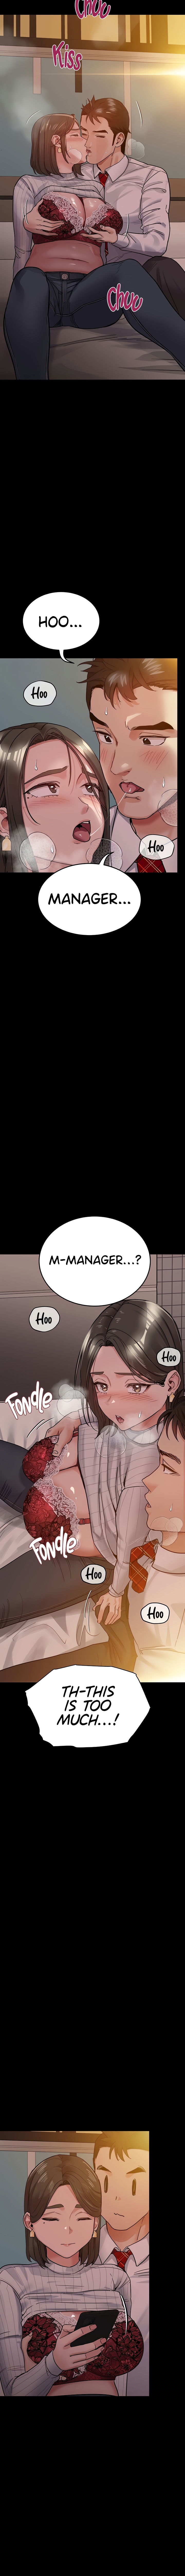 The Story of How I Got Together With the Manager on Christmas HOT image